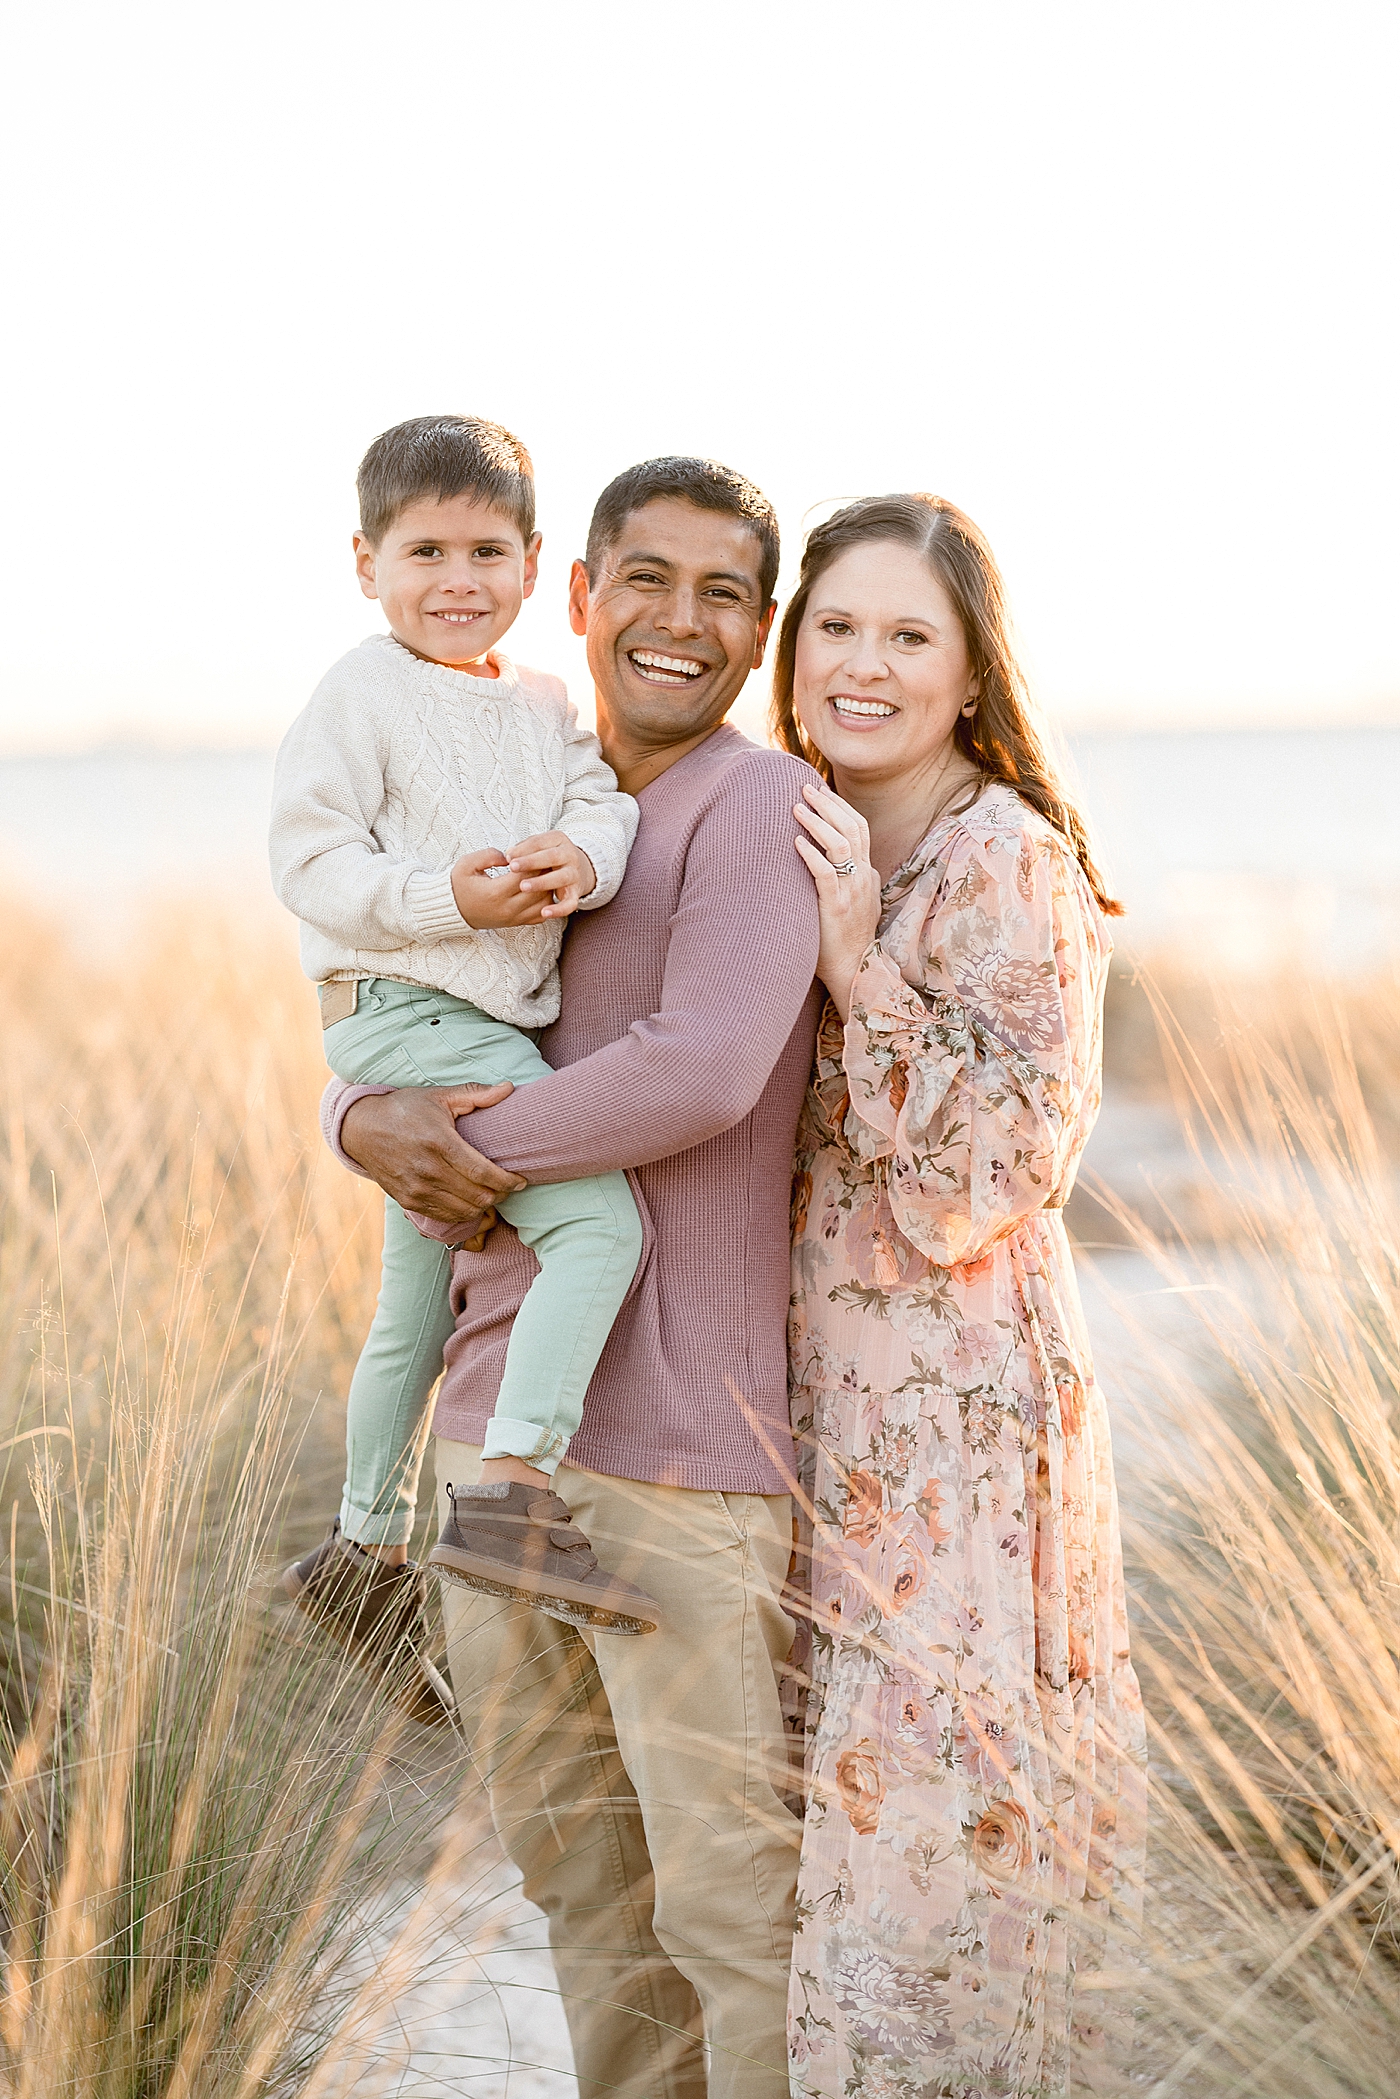 Annual family portraits with Brittany Elise Photography in Tampa.